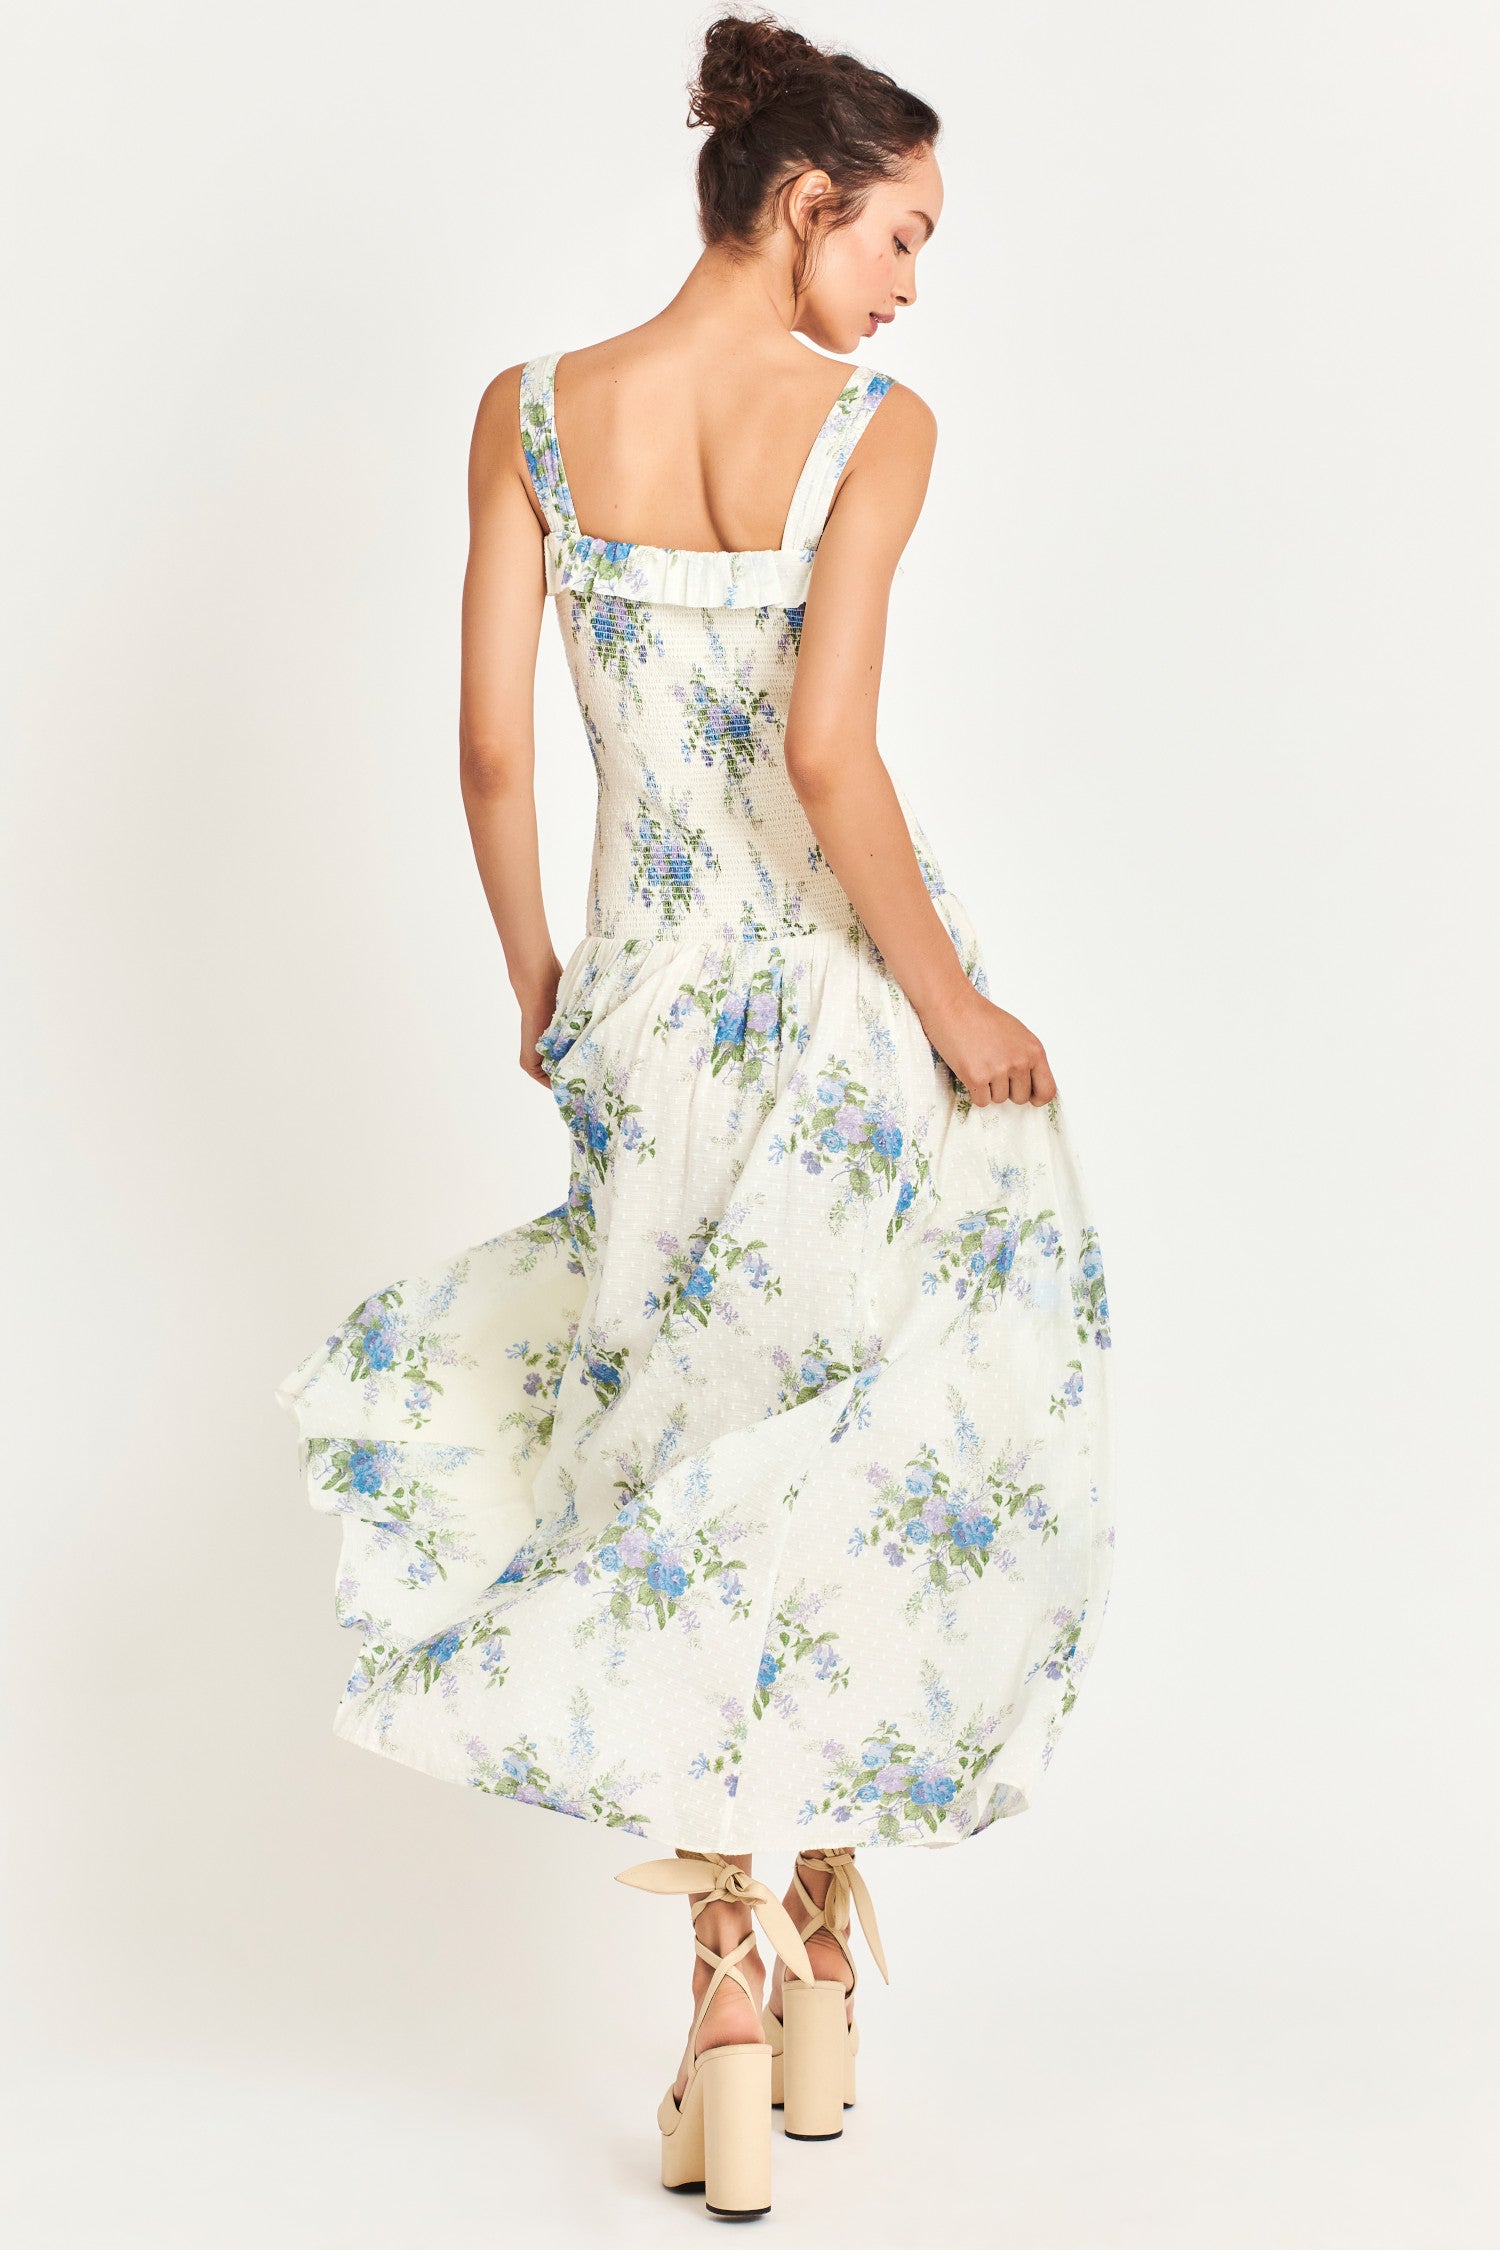 White Maxi dress with a blue heirloom bouquet print on a soft textured dot cotton fabric and a smocked bodice that releases into a sweeping A-line skirt. 